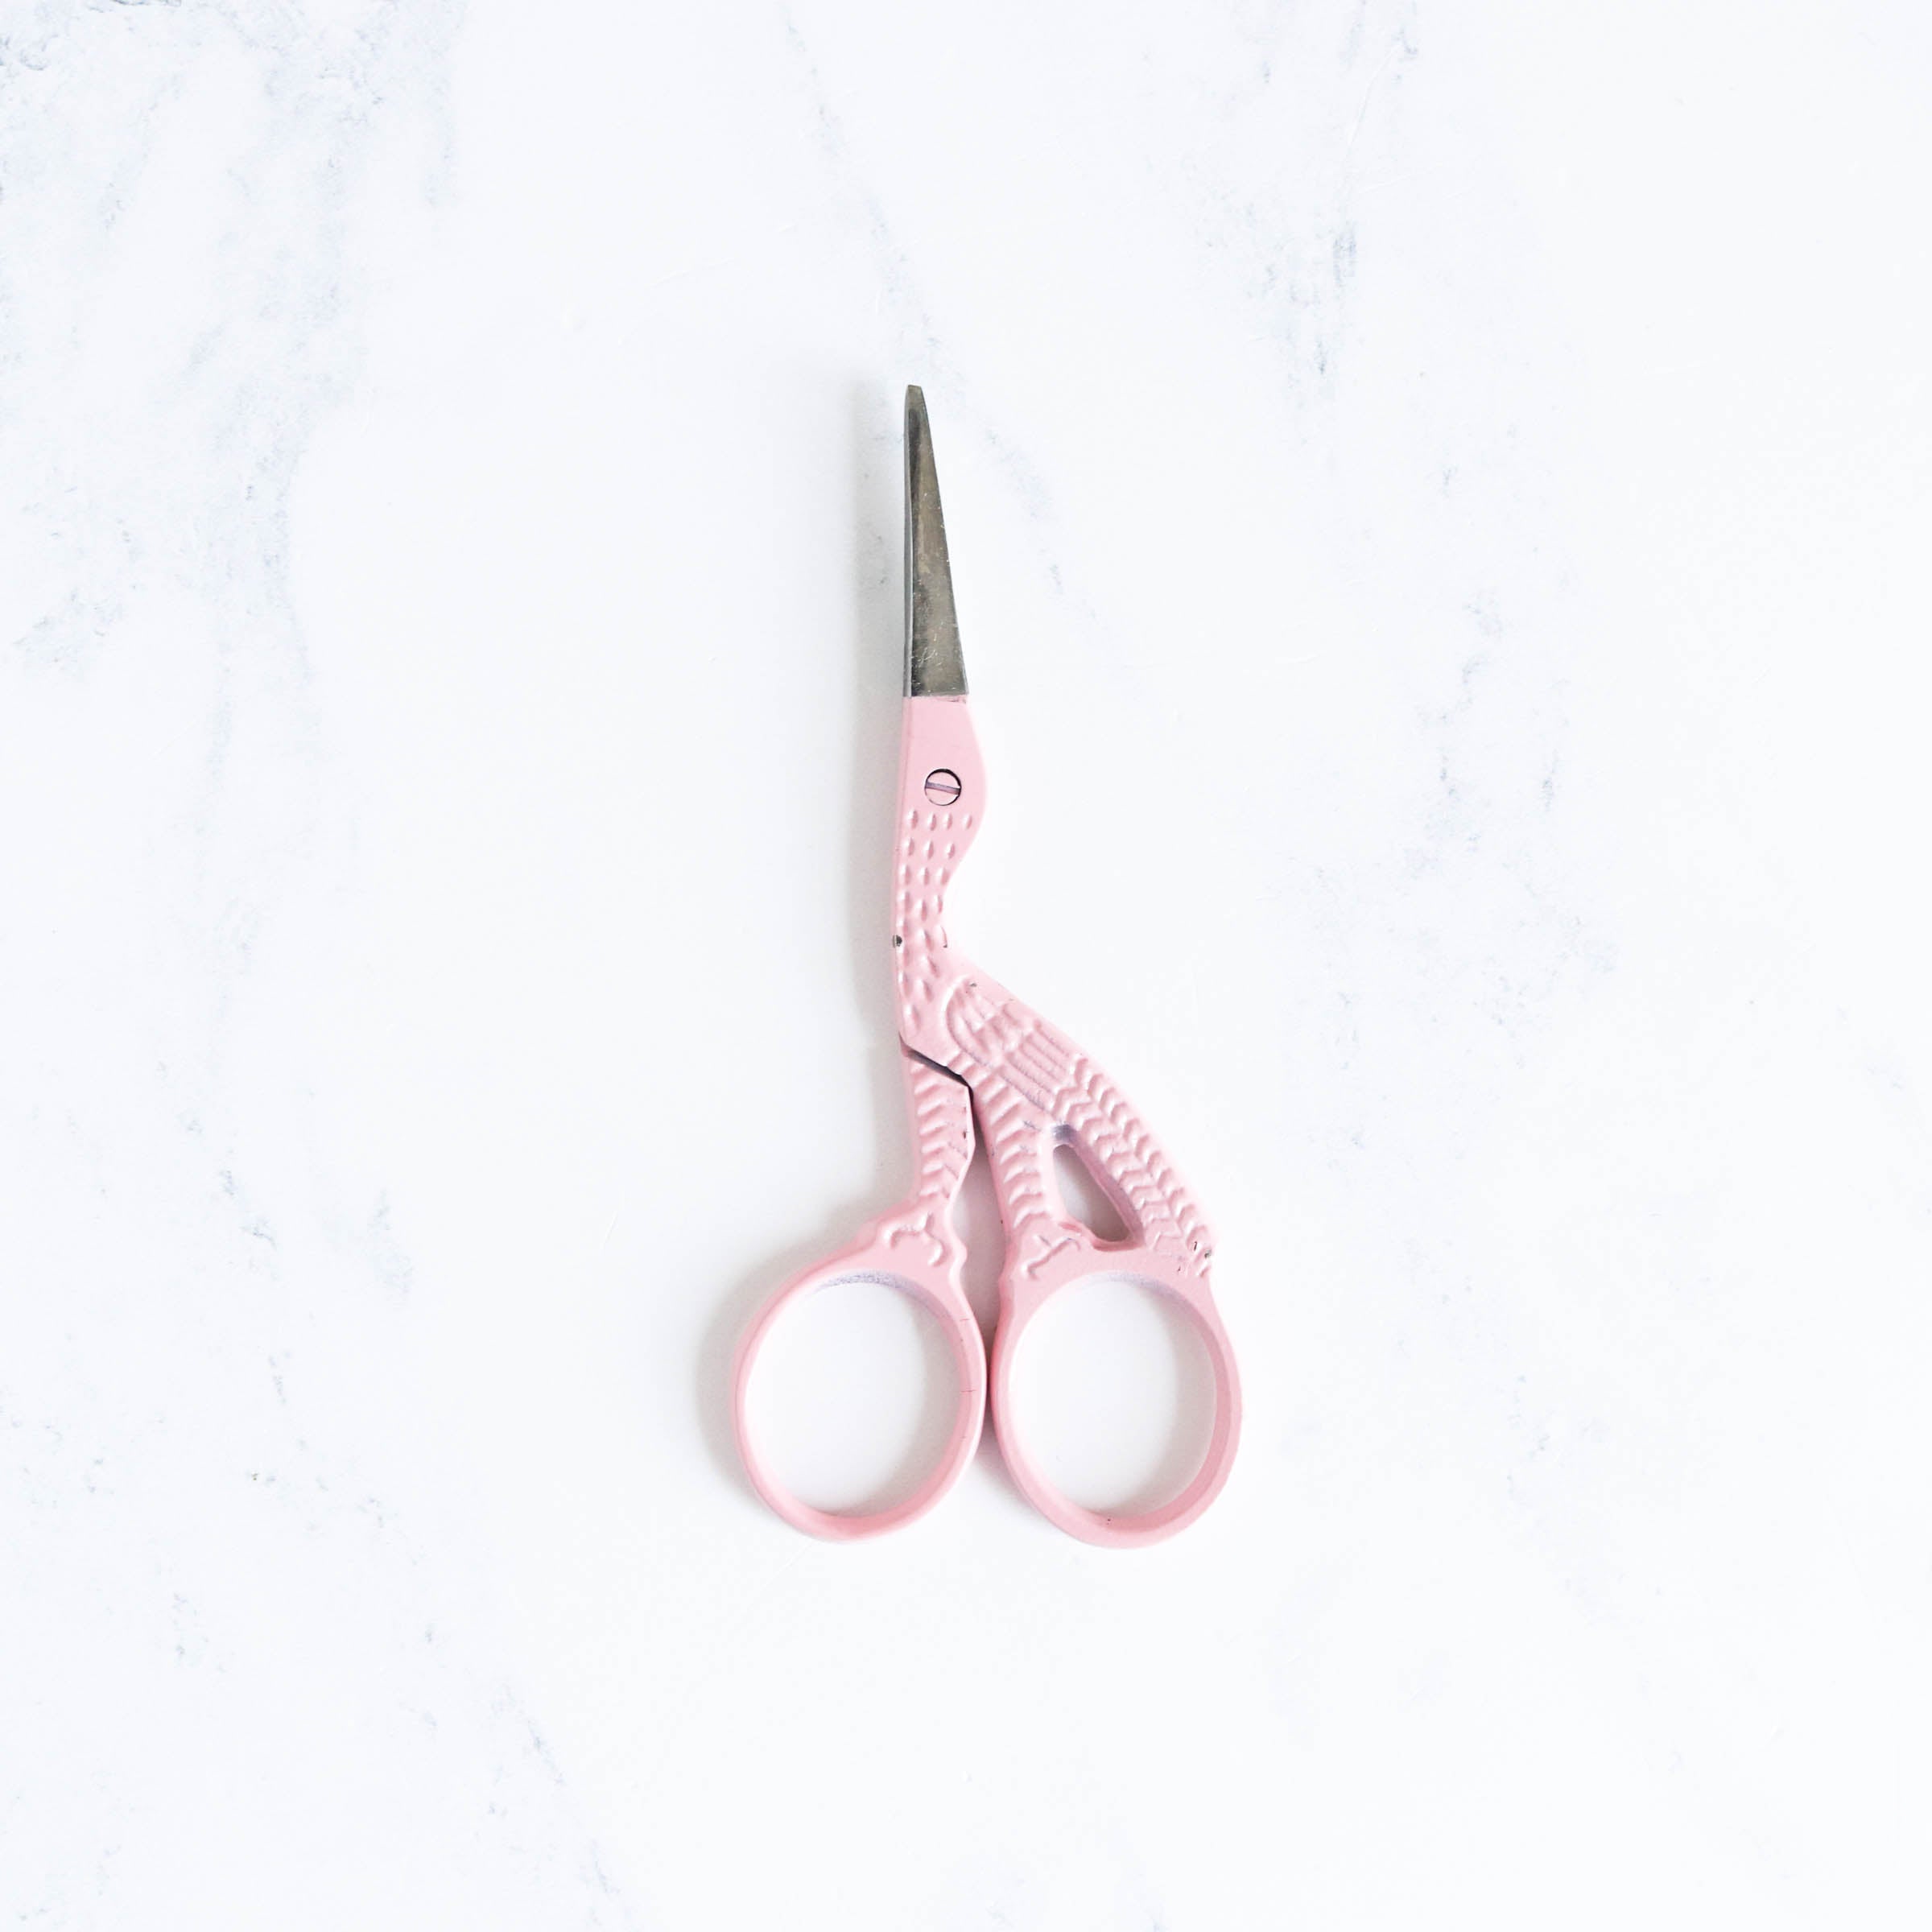 Floral Embroidery Scissors - Small Flower Scissors- Rose Gold